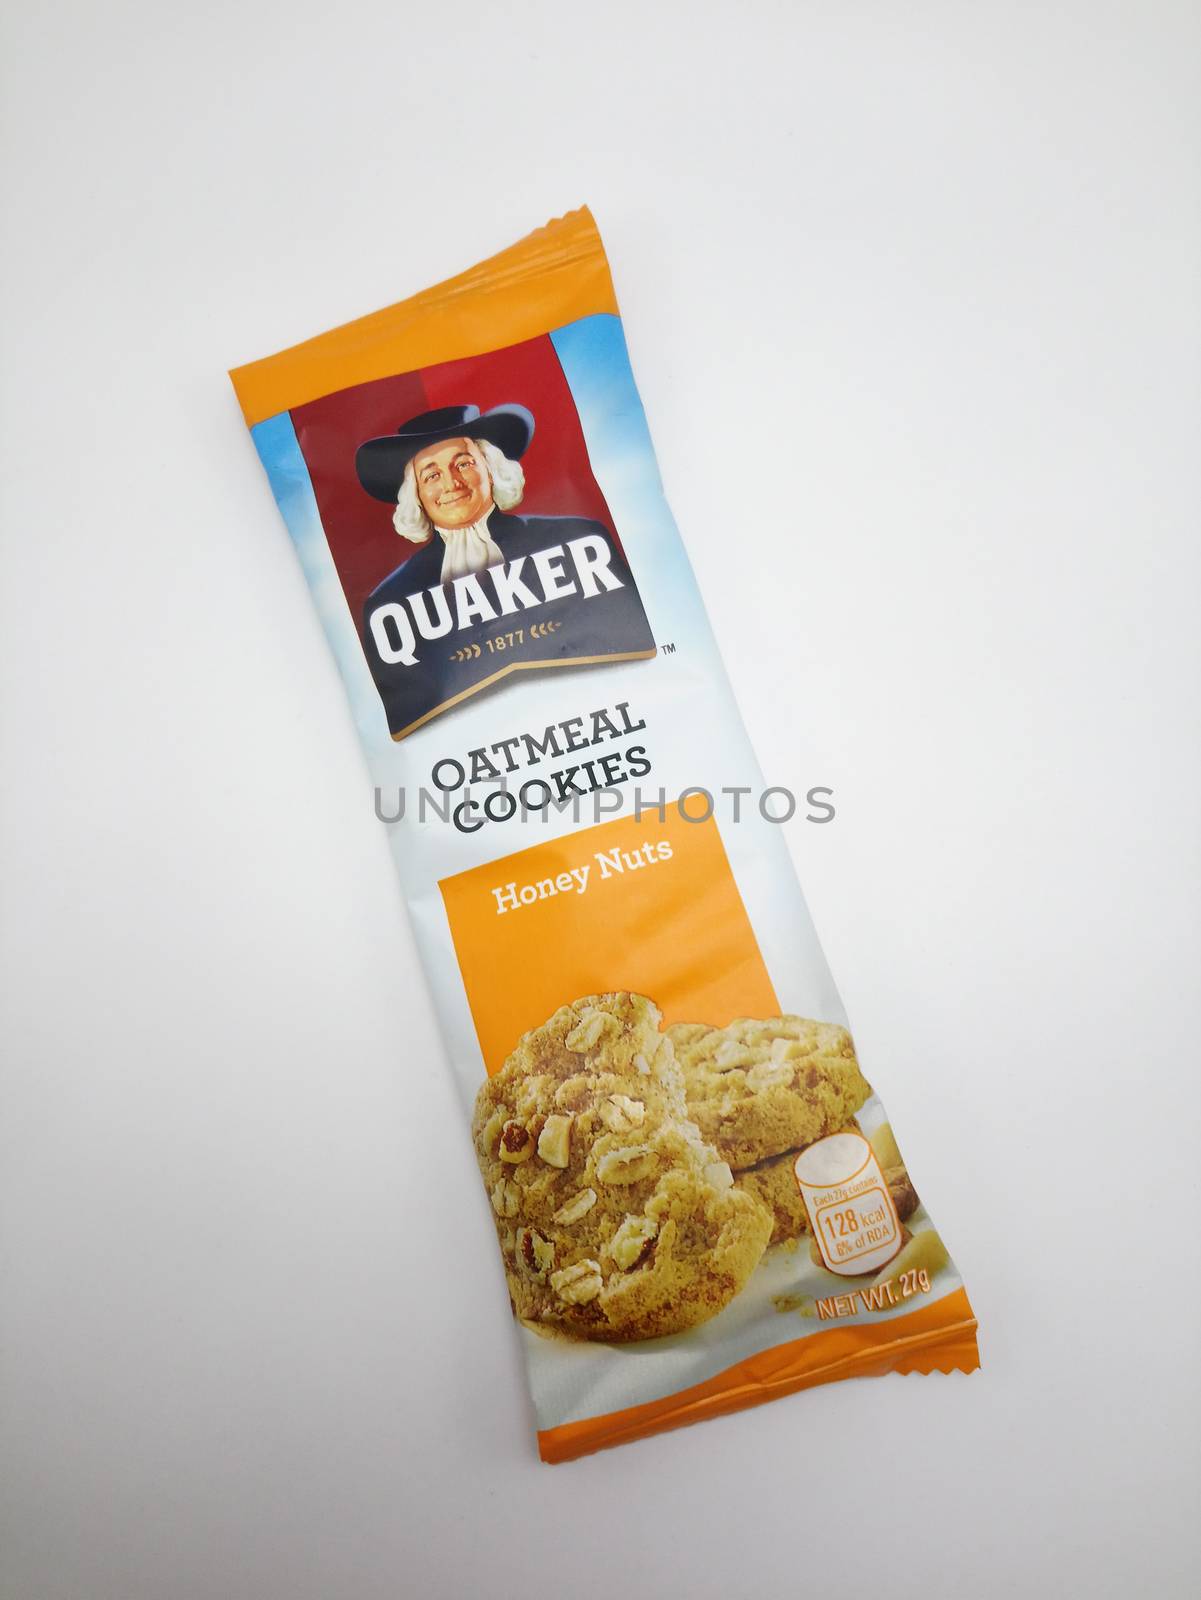 Quaker oatmeal cookies honey nuts in Manila, Philippines by imwaltersy